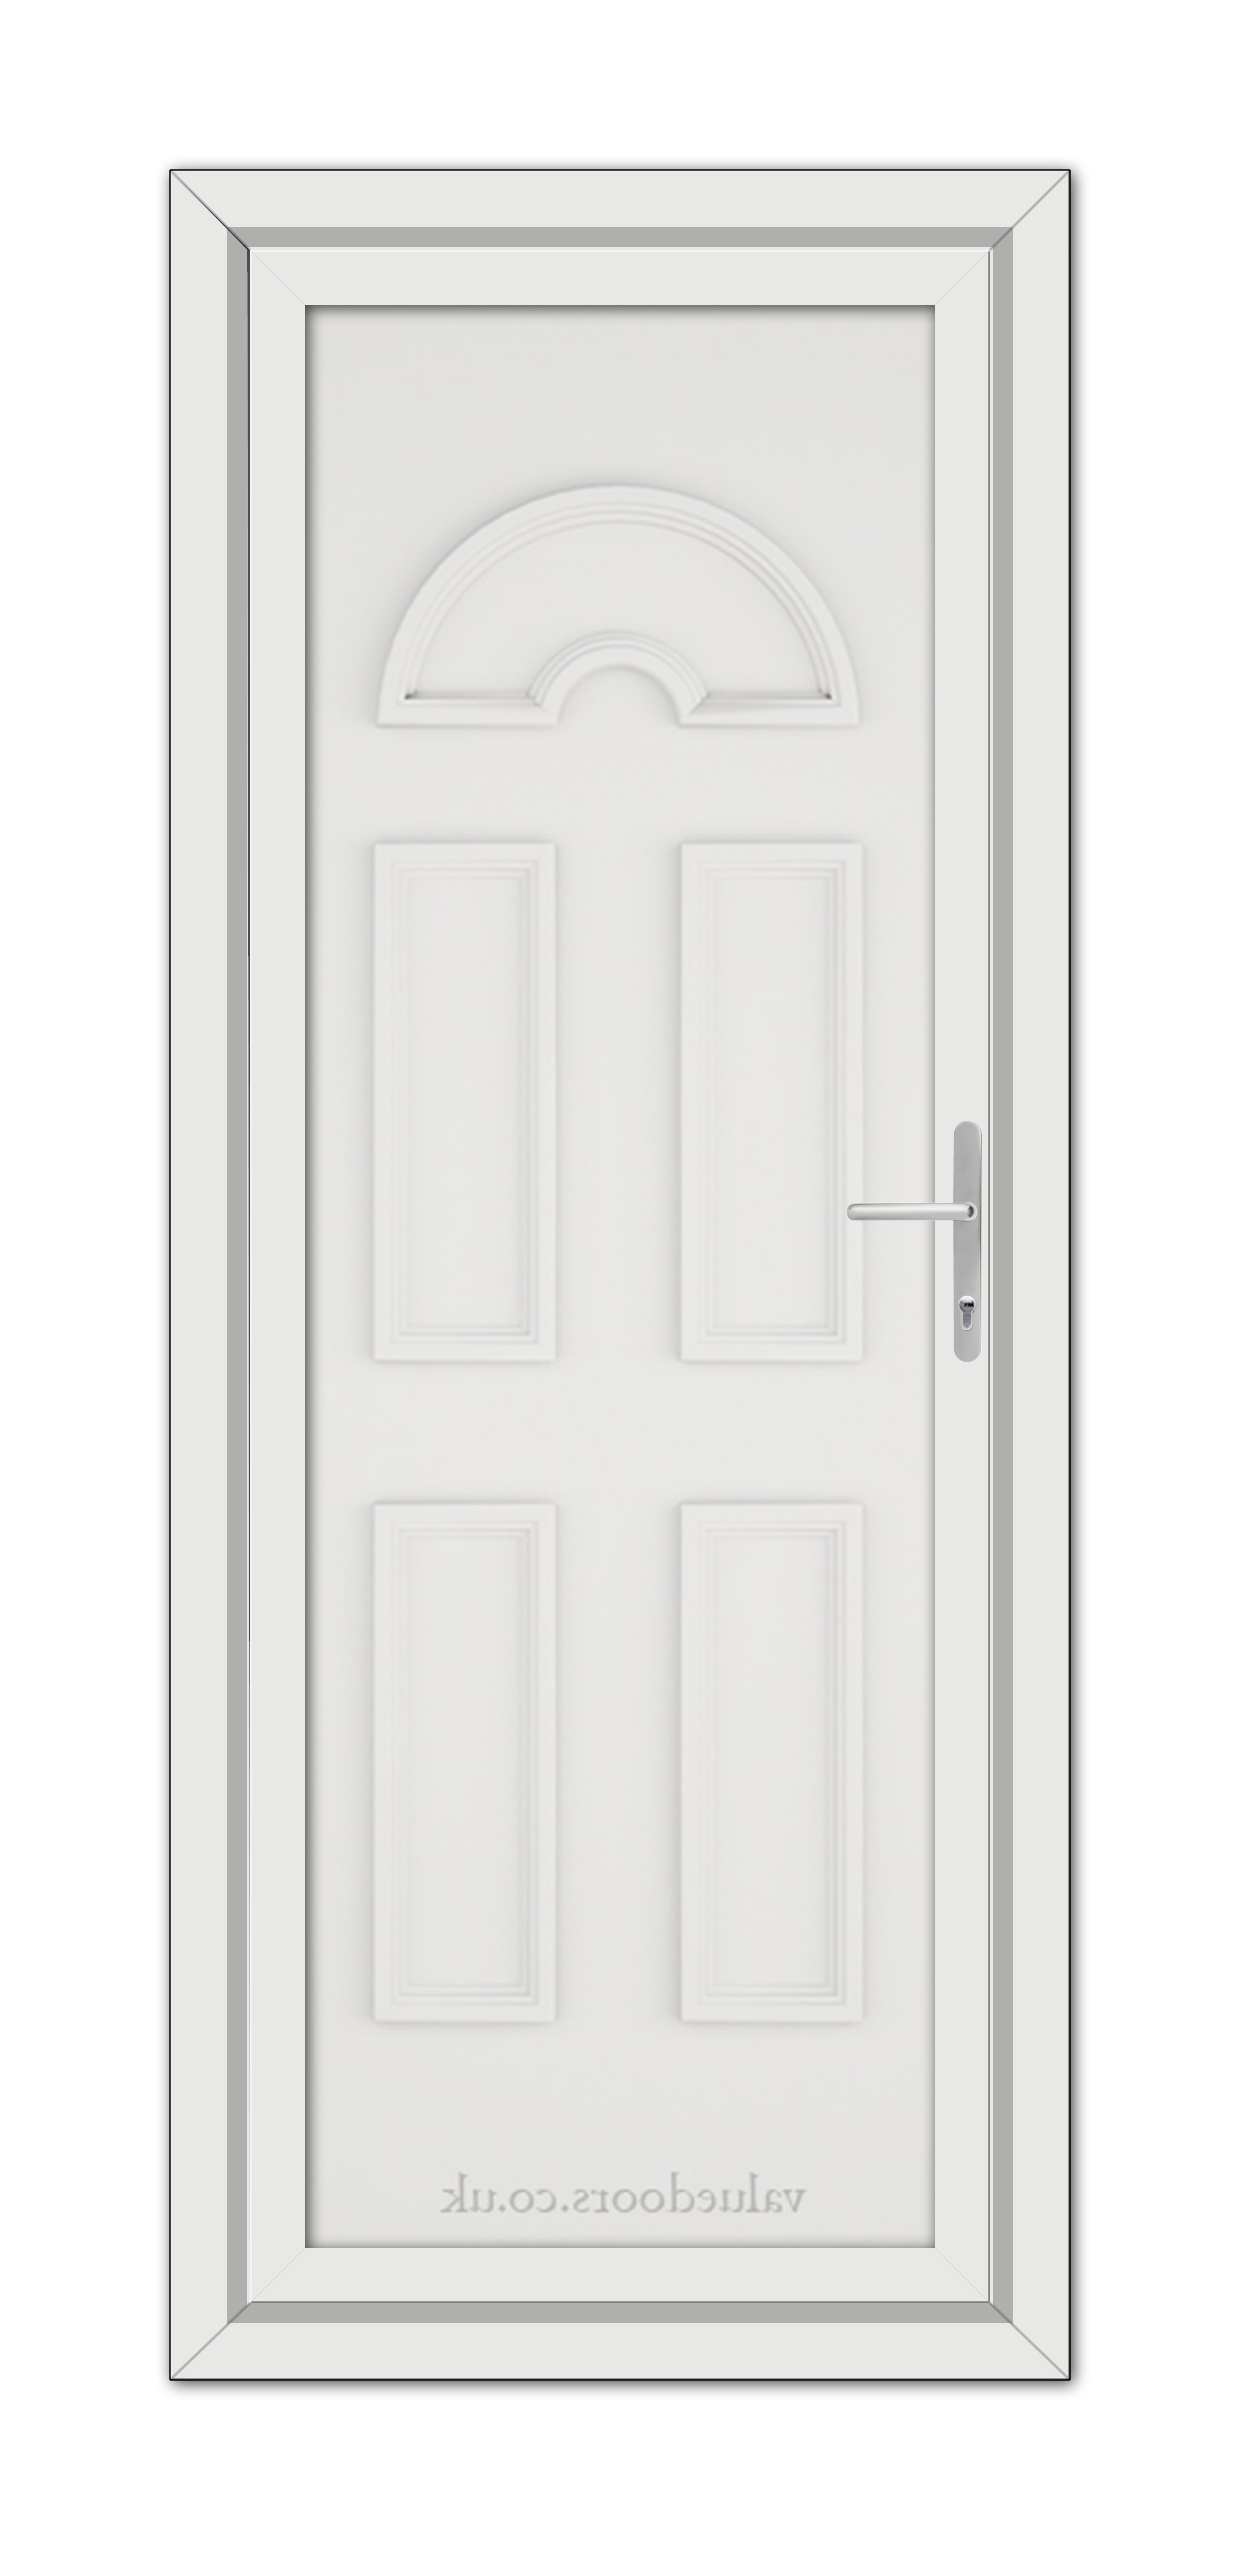 White Sandringham Solid uPVC Door with a semicircular transom window and a modern handle, viewed from the front.